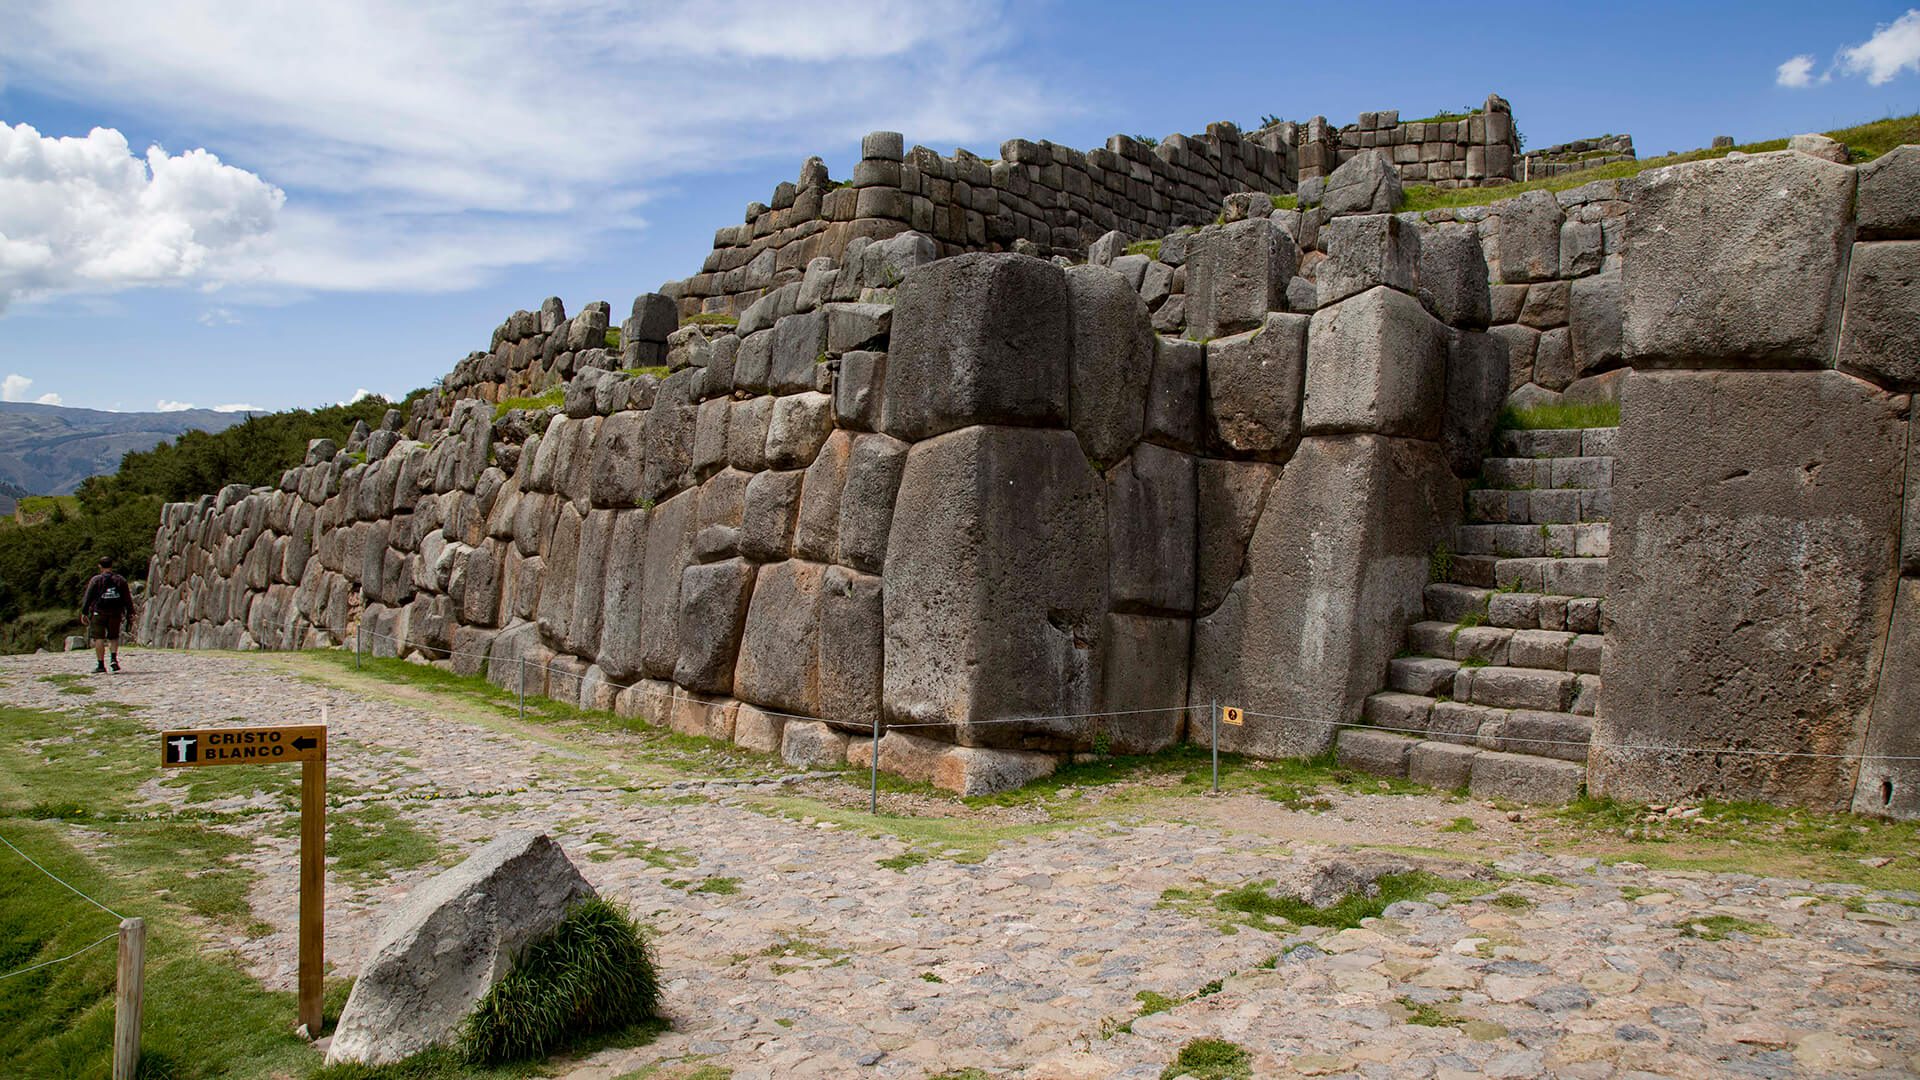 East entrance to Sacsayhuaman. Not open to the public but equally impressive